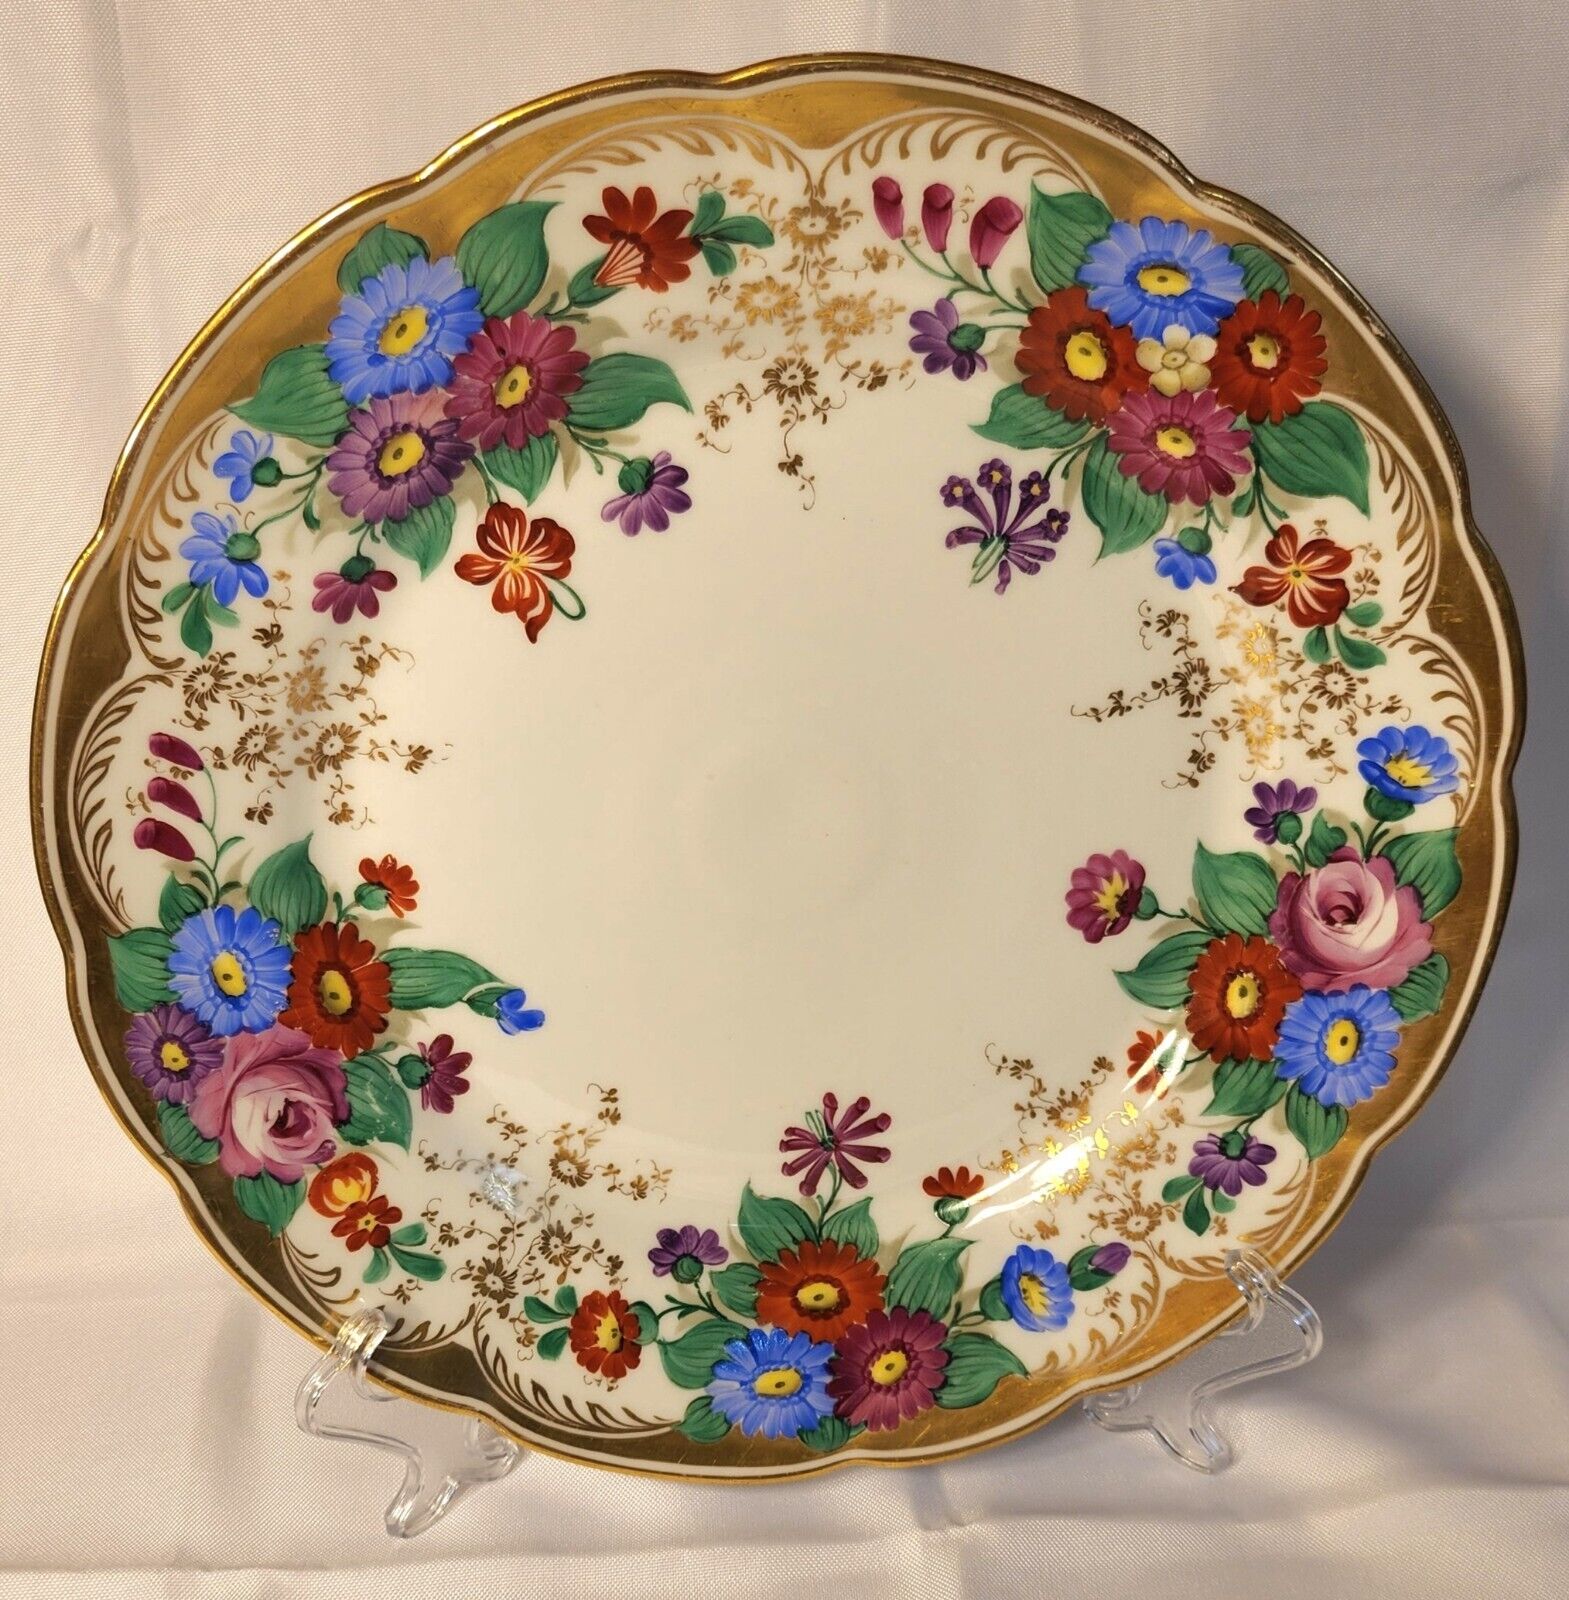 SAXE  Antique German Porcelain Charger Plate  Hand Painted Signed Floral Gilt